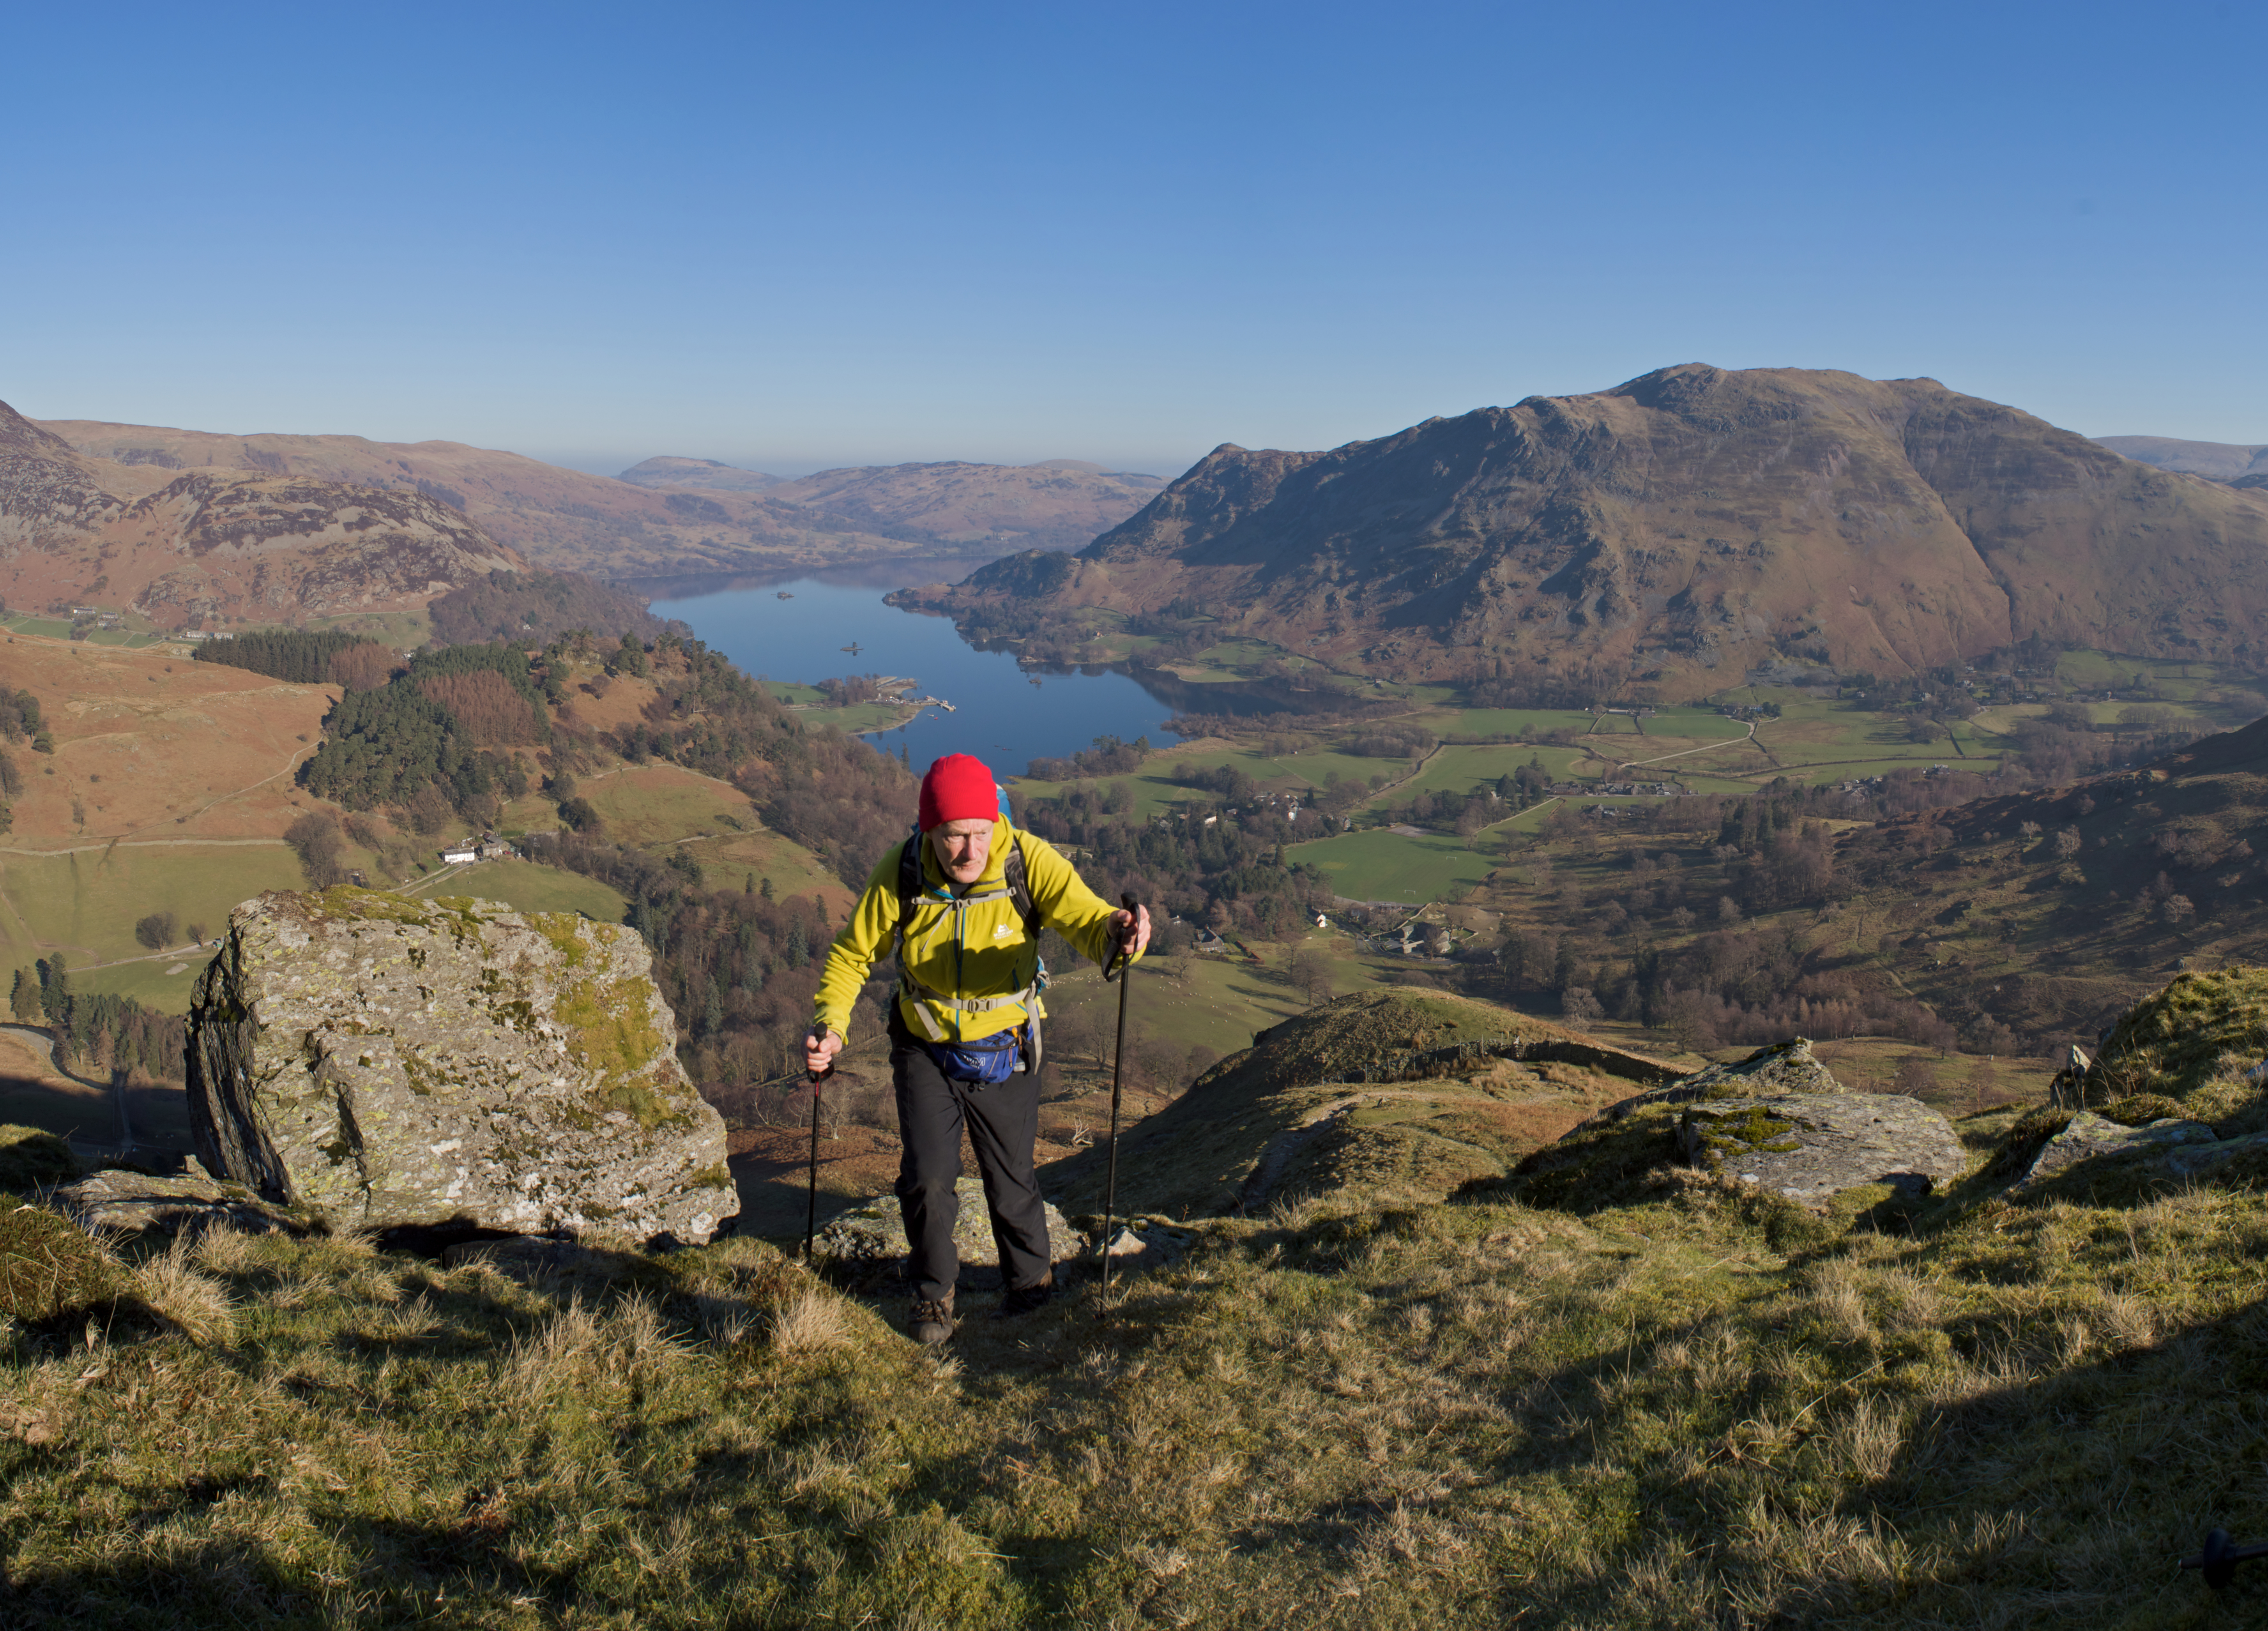 Great – I've got a possible cover photo. St Sunday Crag, Lake District. Taken by tripod, how else?